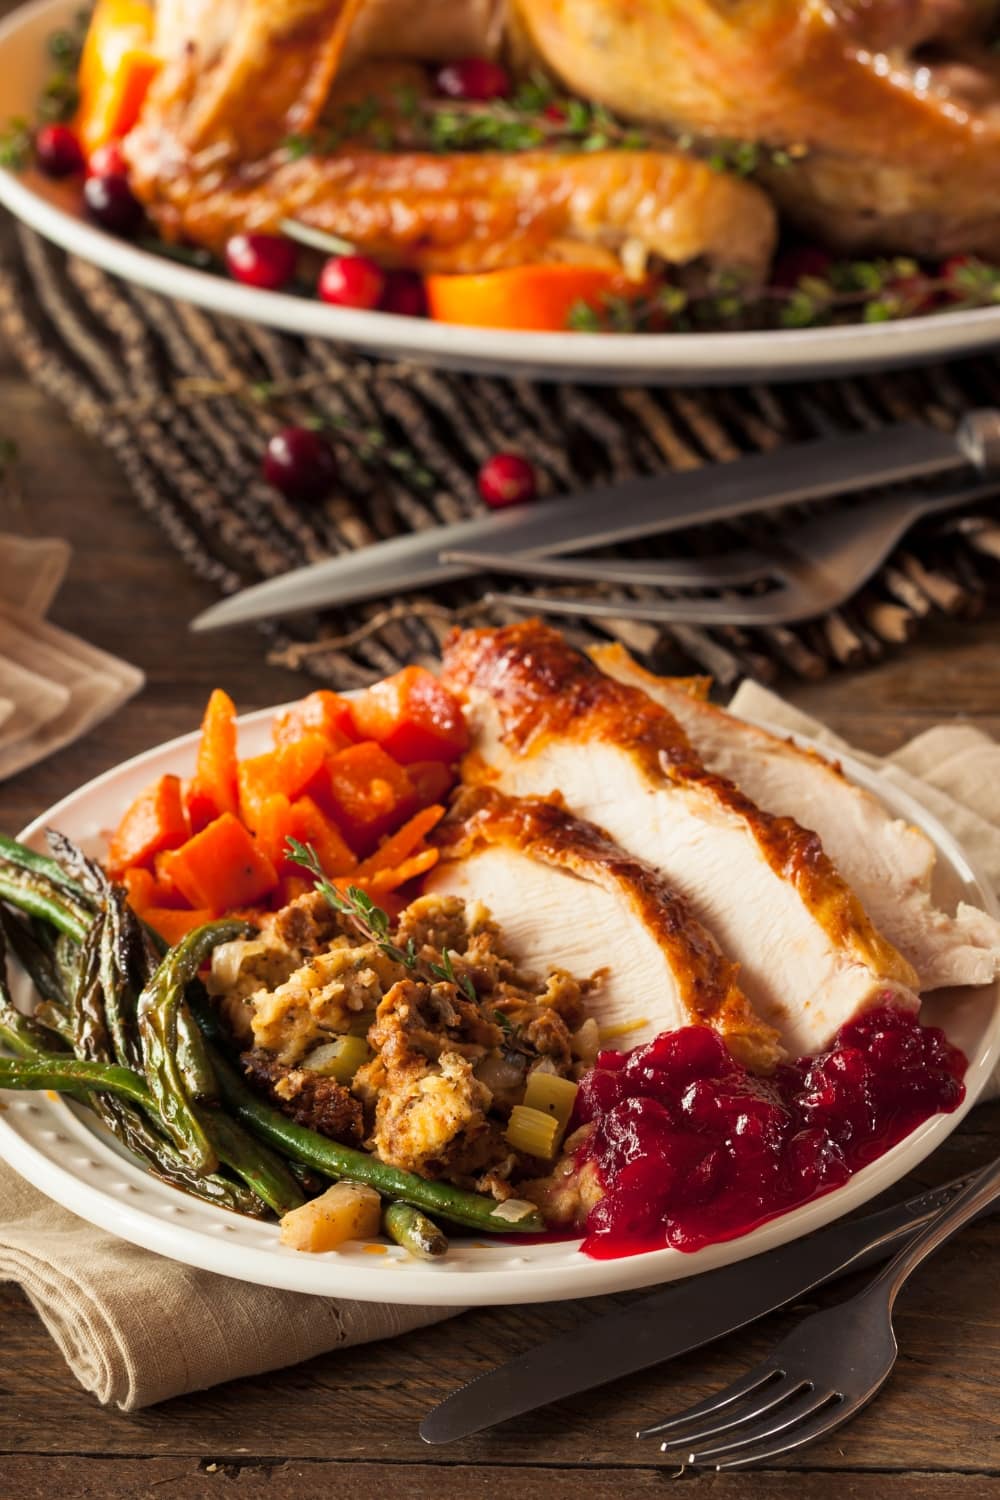 A serving of sliced roasted turkey, green beans, carrots and cranberry sauce.